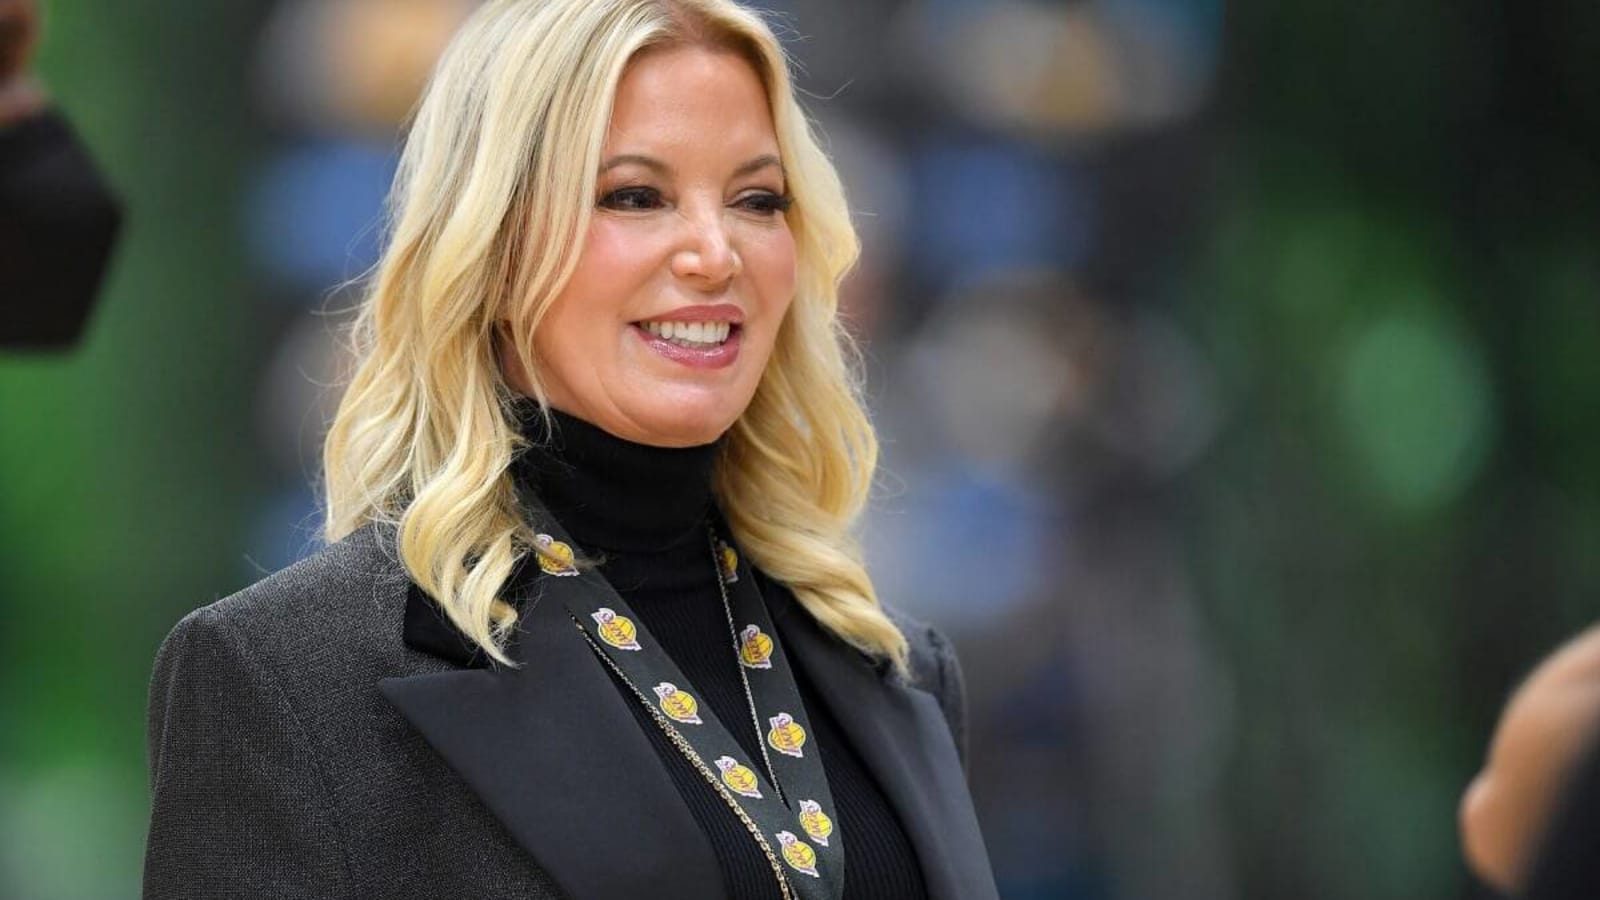  Watch Jeanie Buss Honor Slava Medvedenko With New Championship Rings